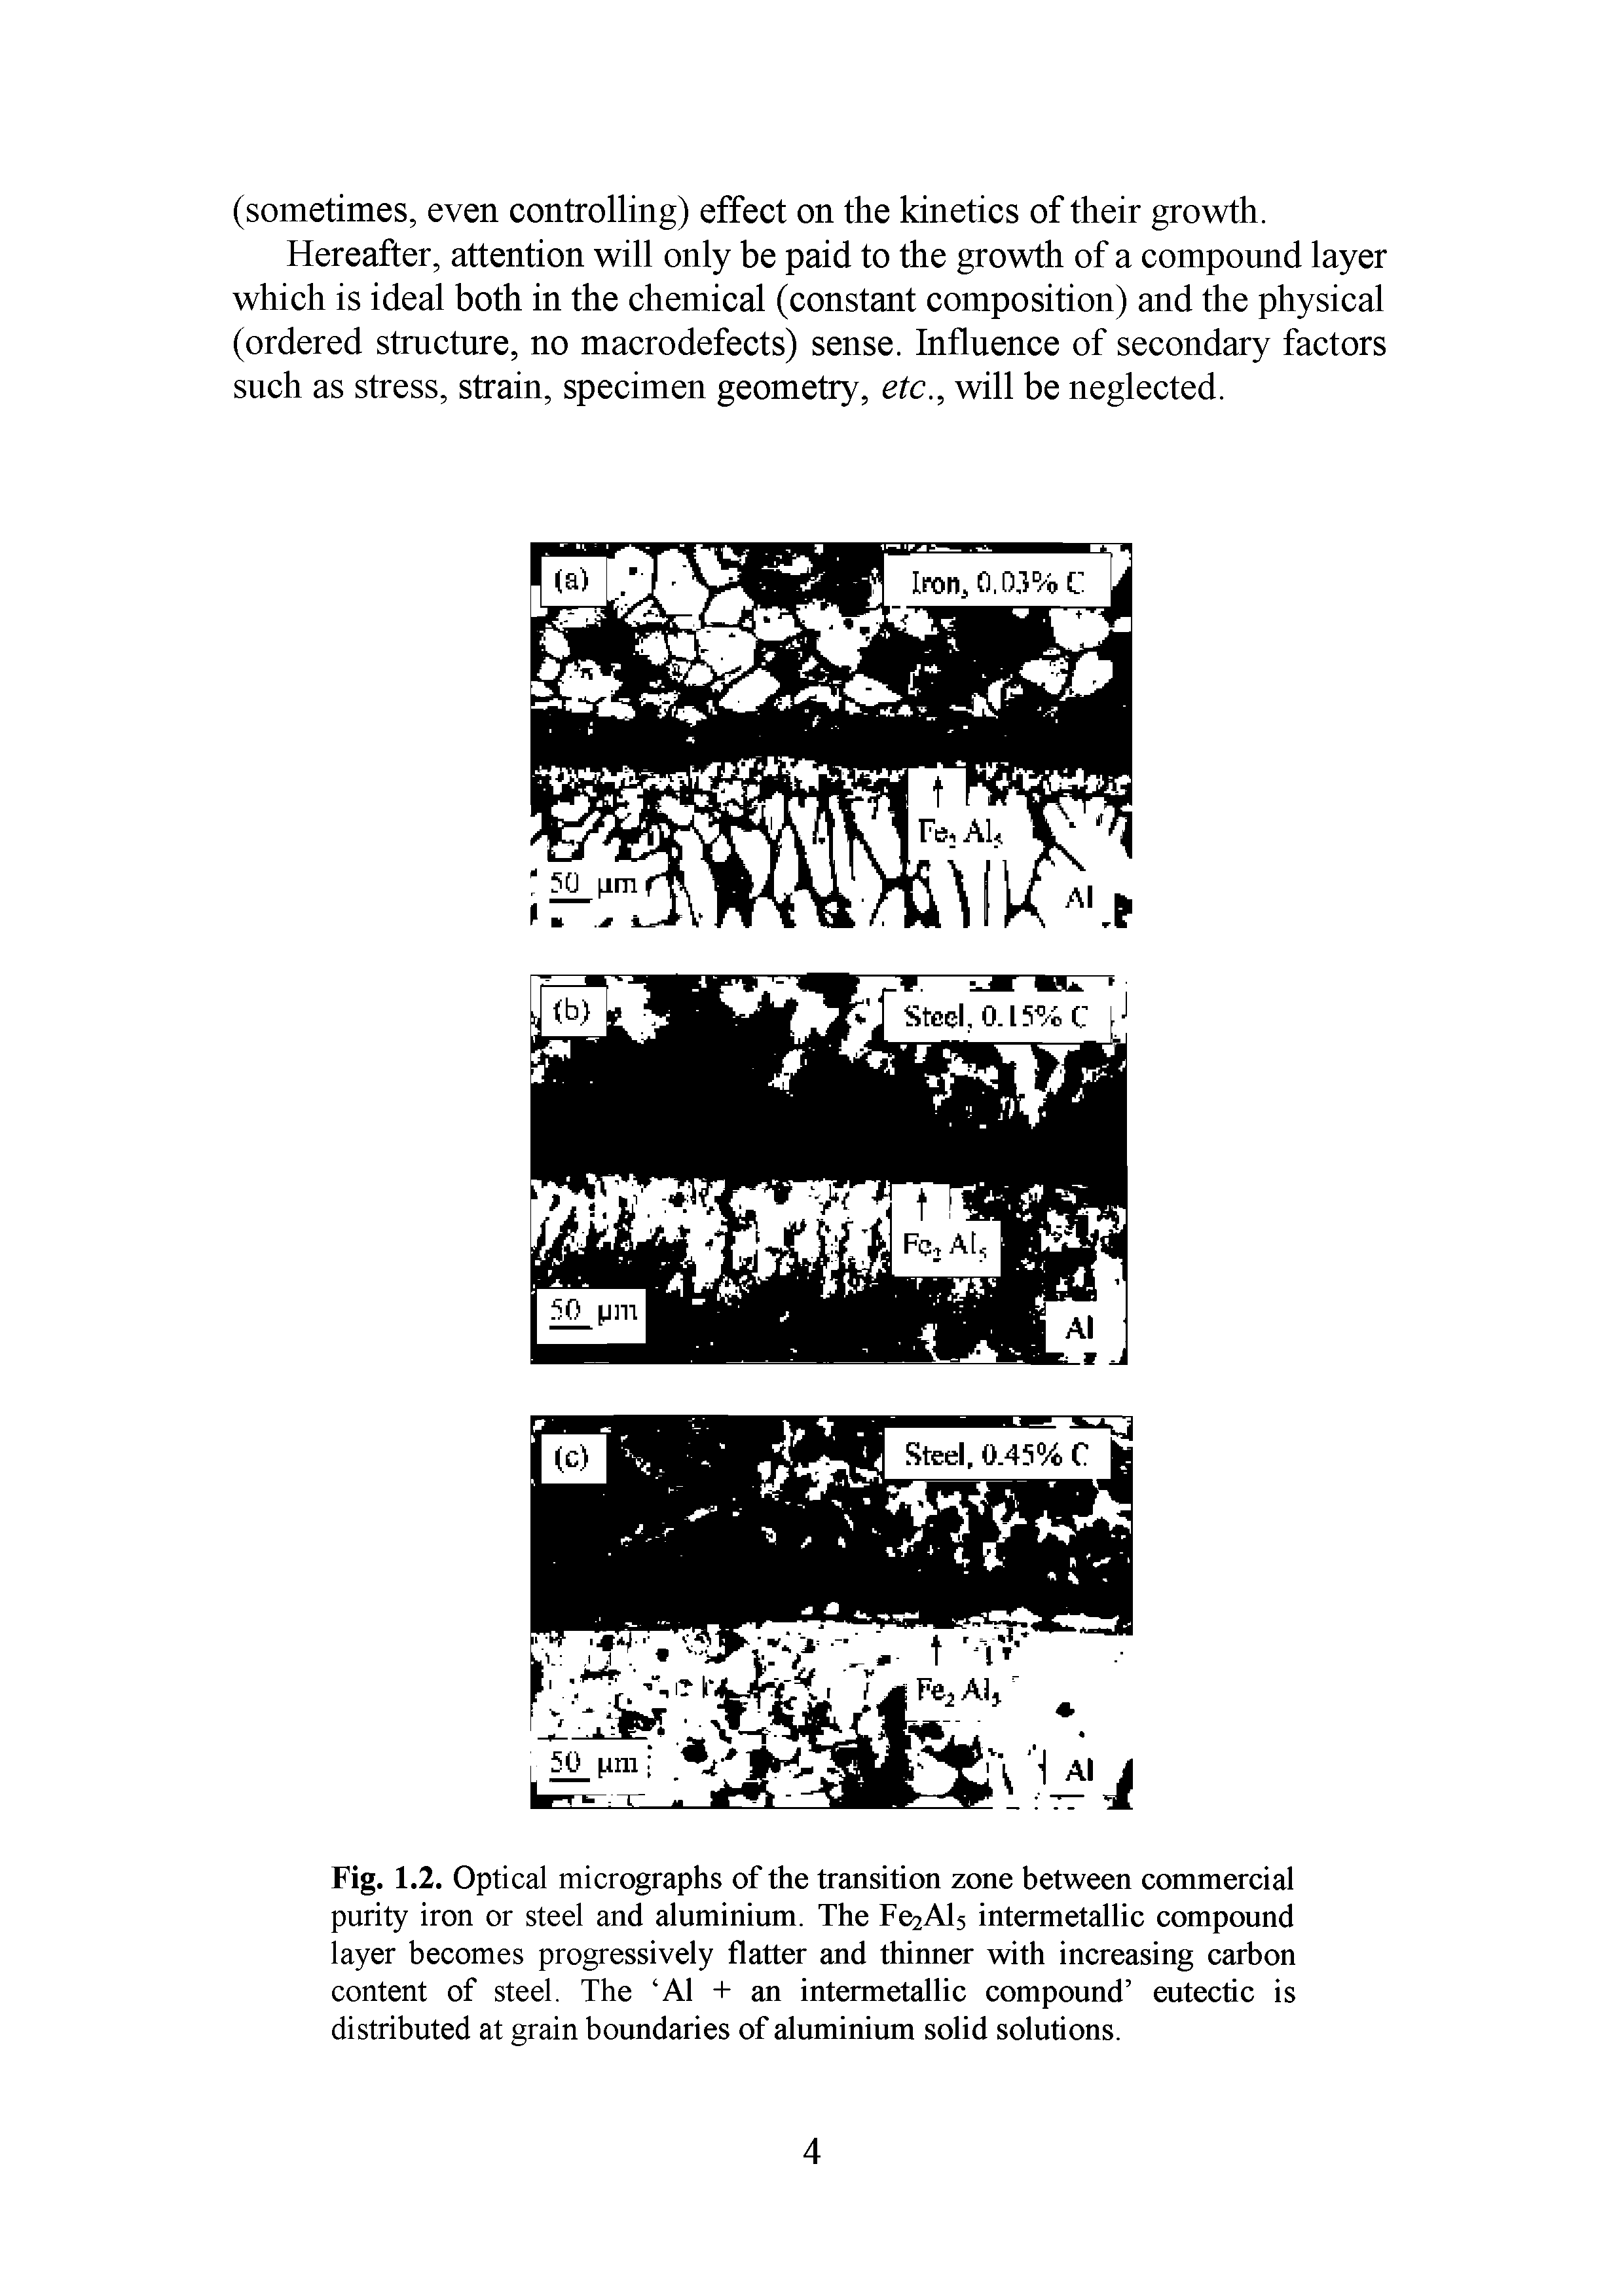 Fig. 1.2. Optical micrographs of the transition zone between commercial purity iron or steel and aluminium. The Fe2Al5 intermetallic compound layer becomes progressively flatter and thinner with increasing carbon content of steel. The A1 + an intermetallic compound eutectic is distributed at grain boundaries of aluminium solid solutions.